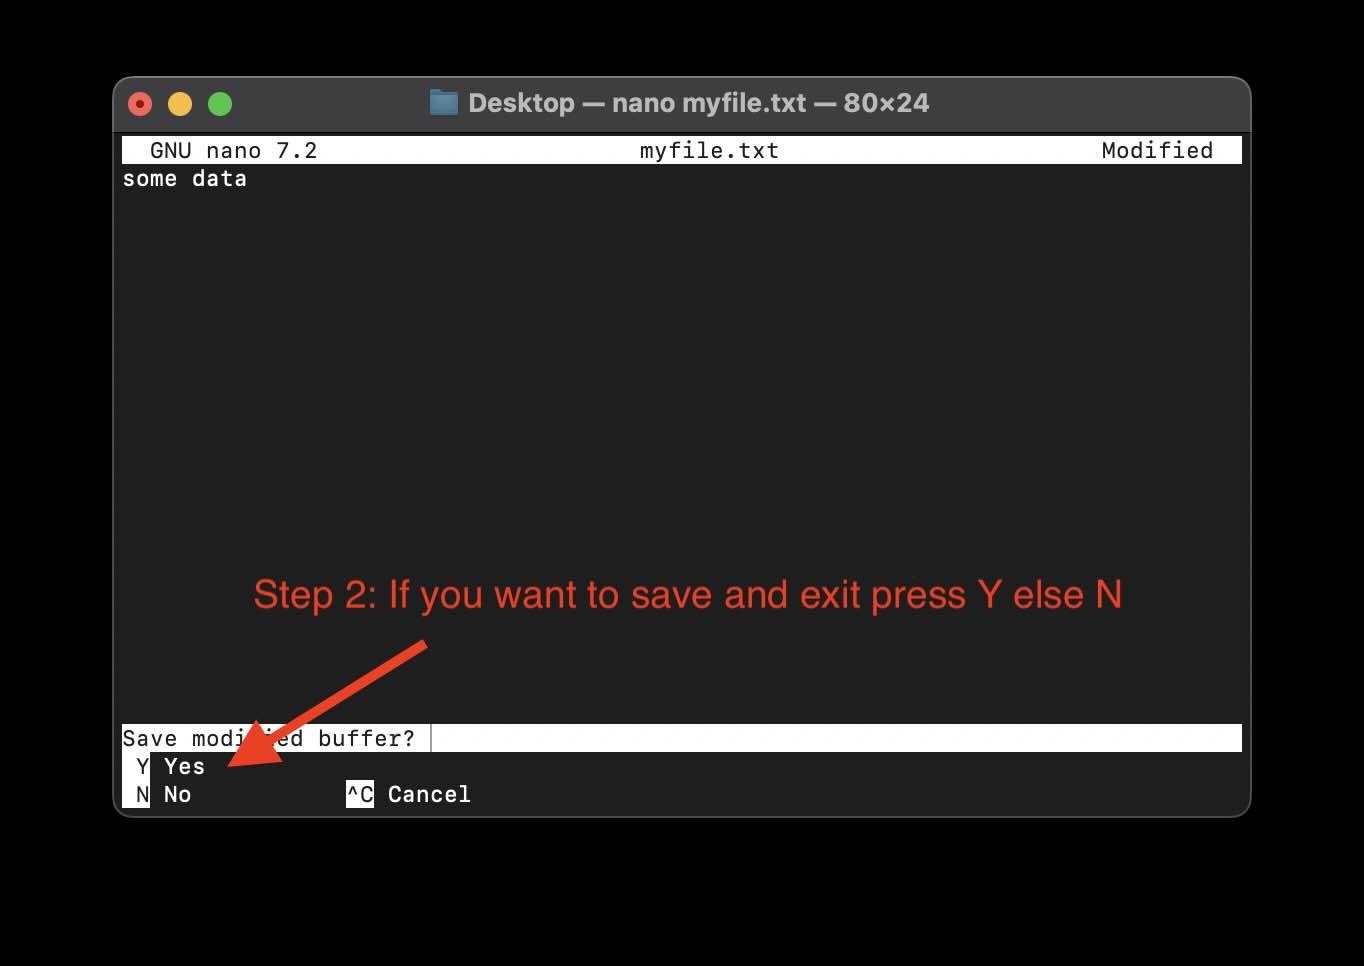 Step 2- Now if you want to save and exit press Y else N